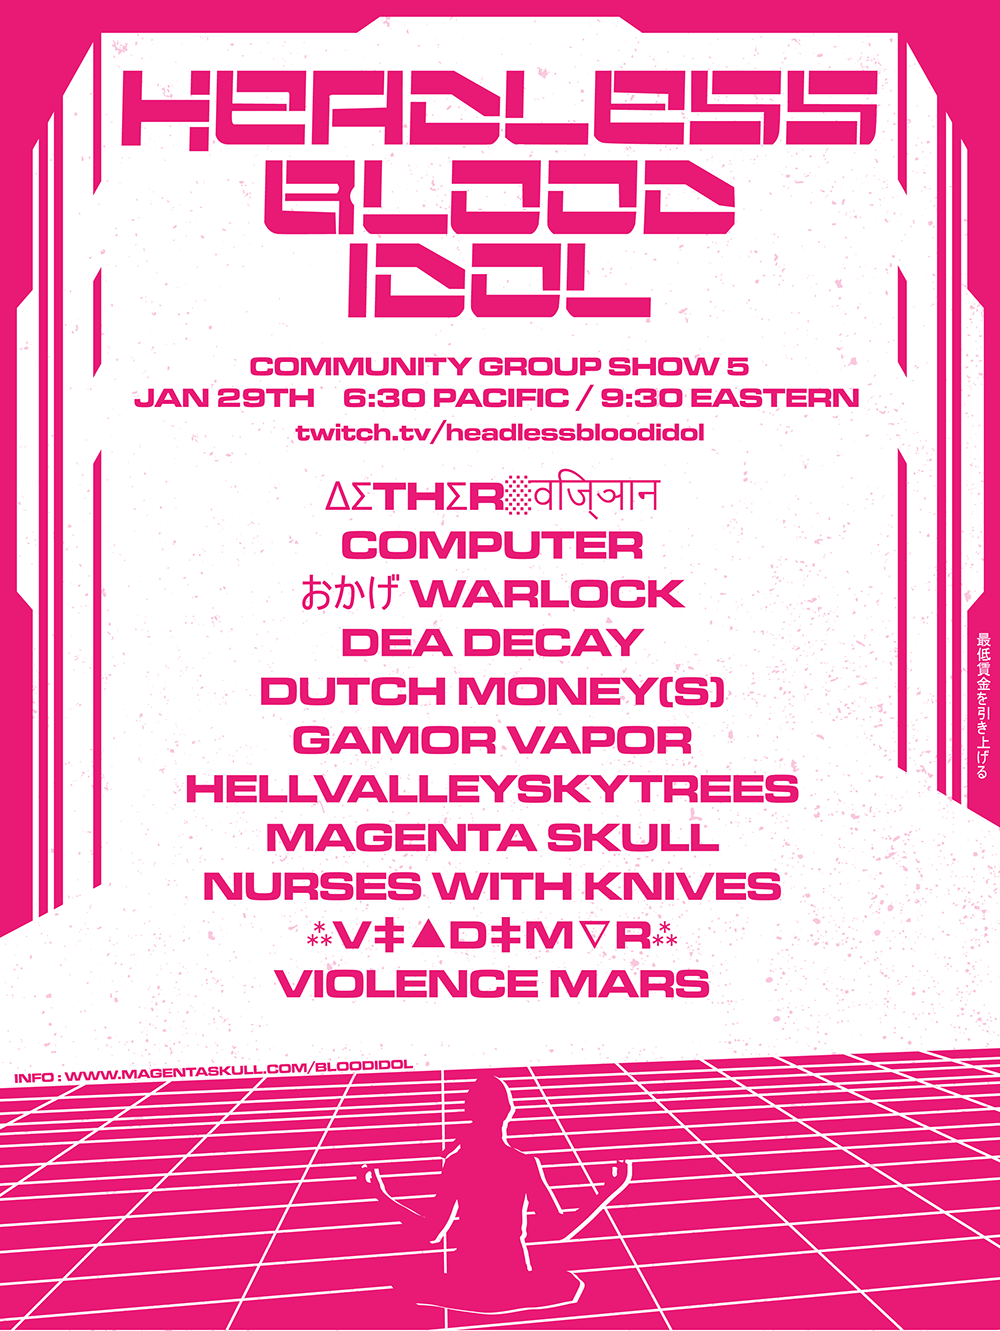 HEADLESS BLOOD IDOL GROUP SHOW 5 - FLYER BY MALARIA LABS